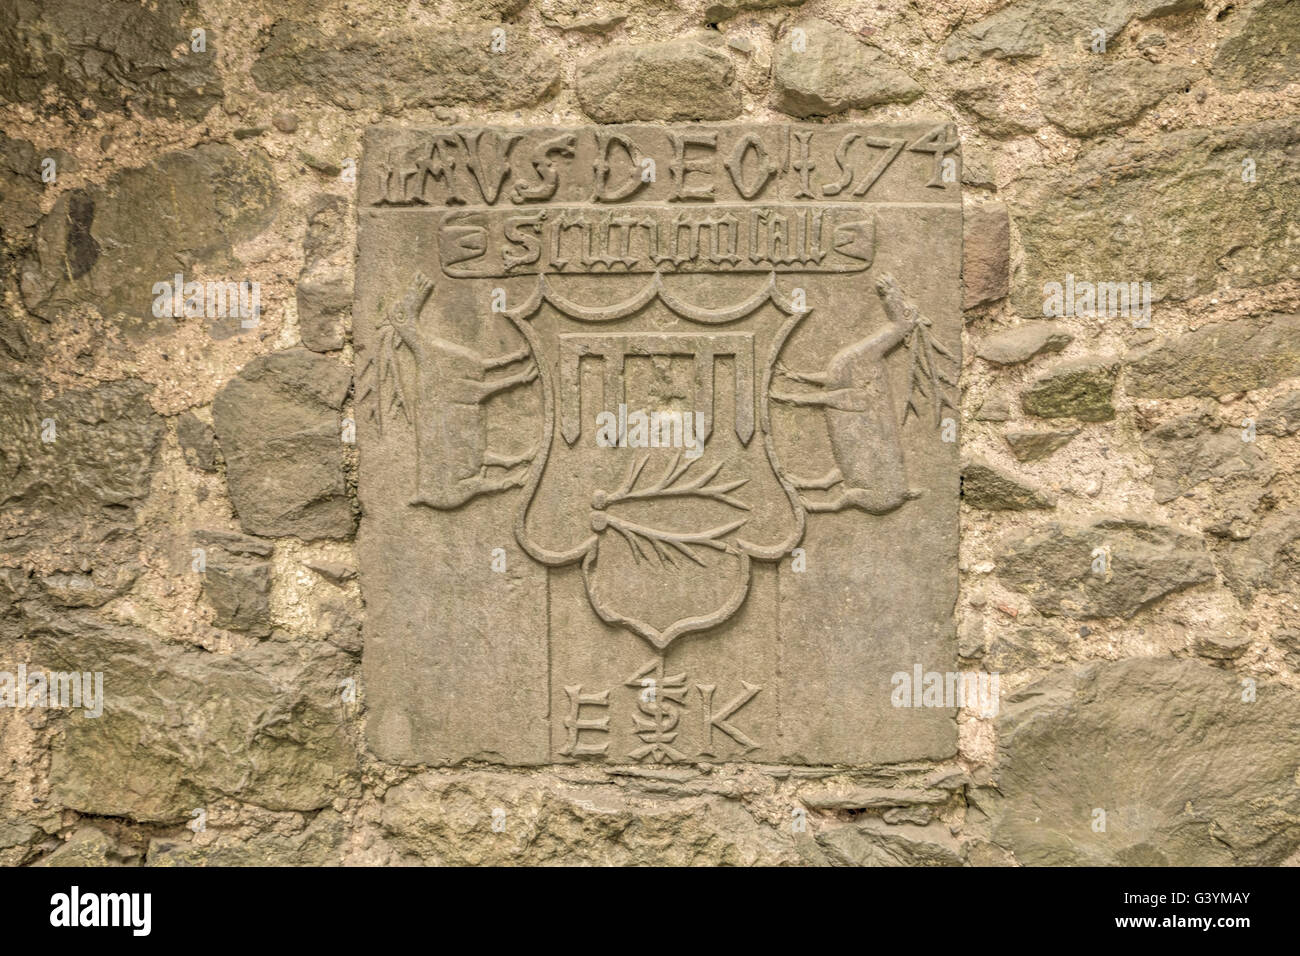 Medieval carved stone tablet displayed in the small museum at St. Patrick's Rock of Cashel,Tipperary, Munster, Ireland. Stock Photo